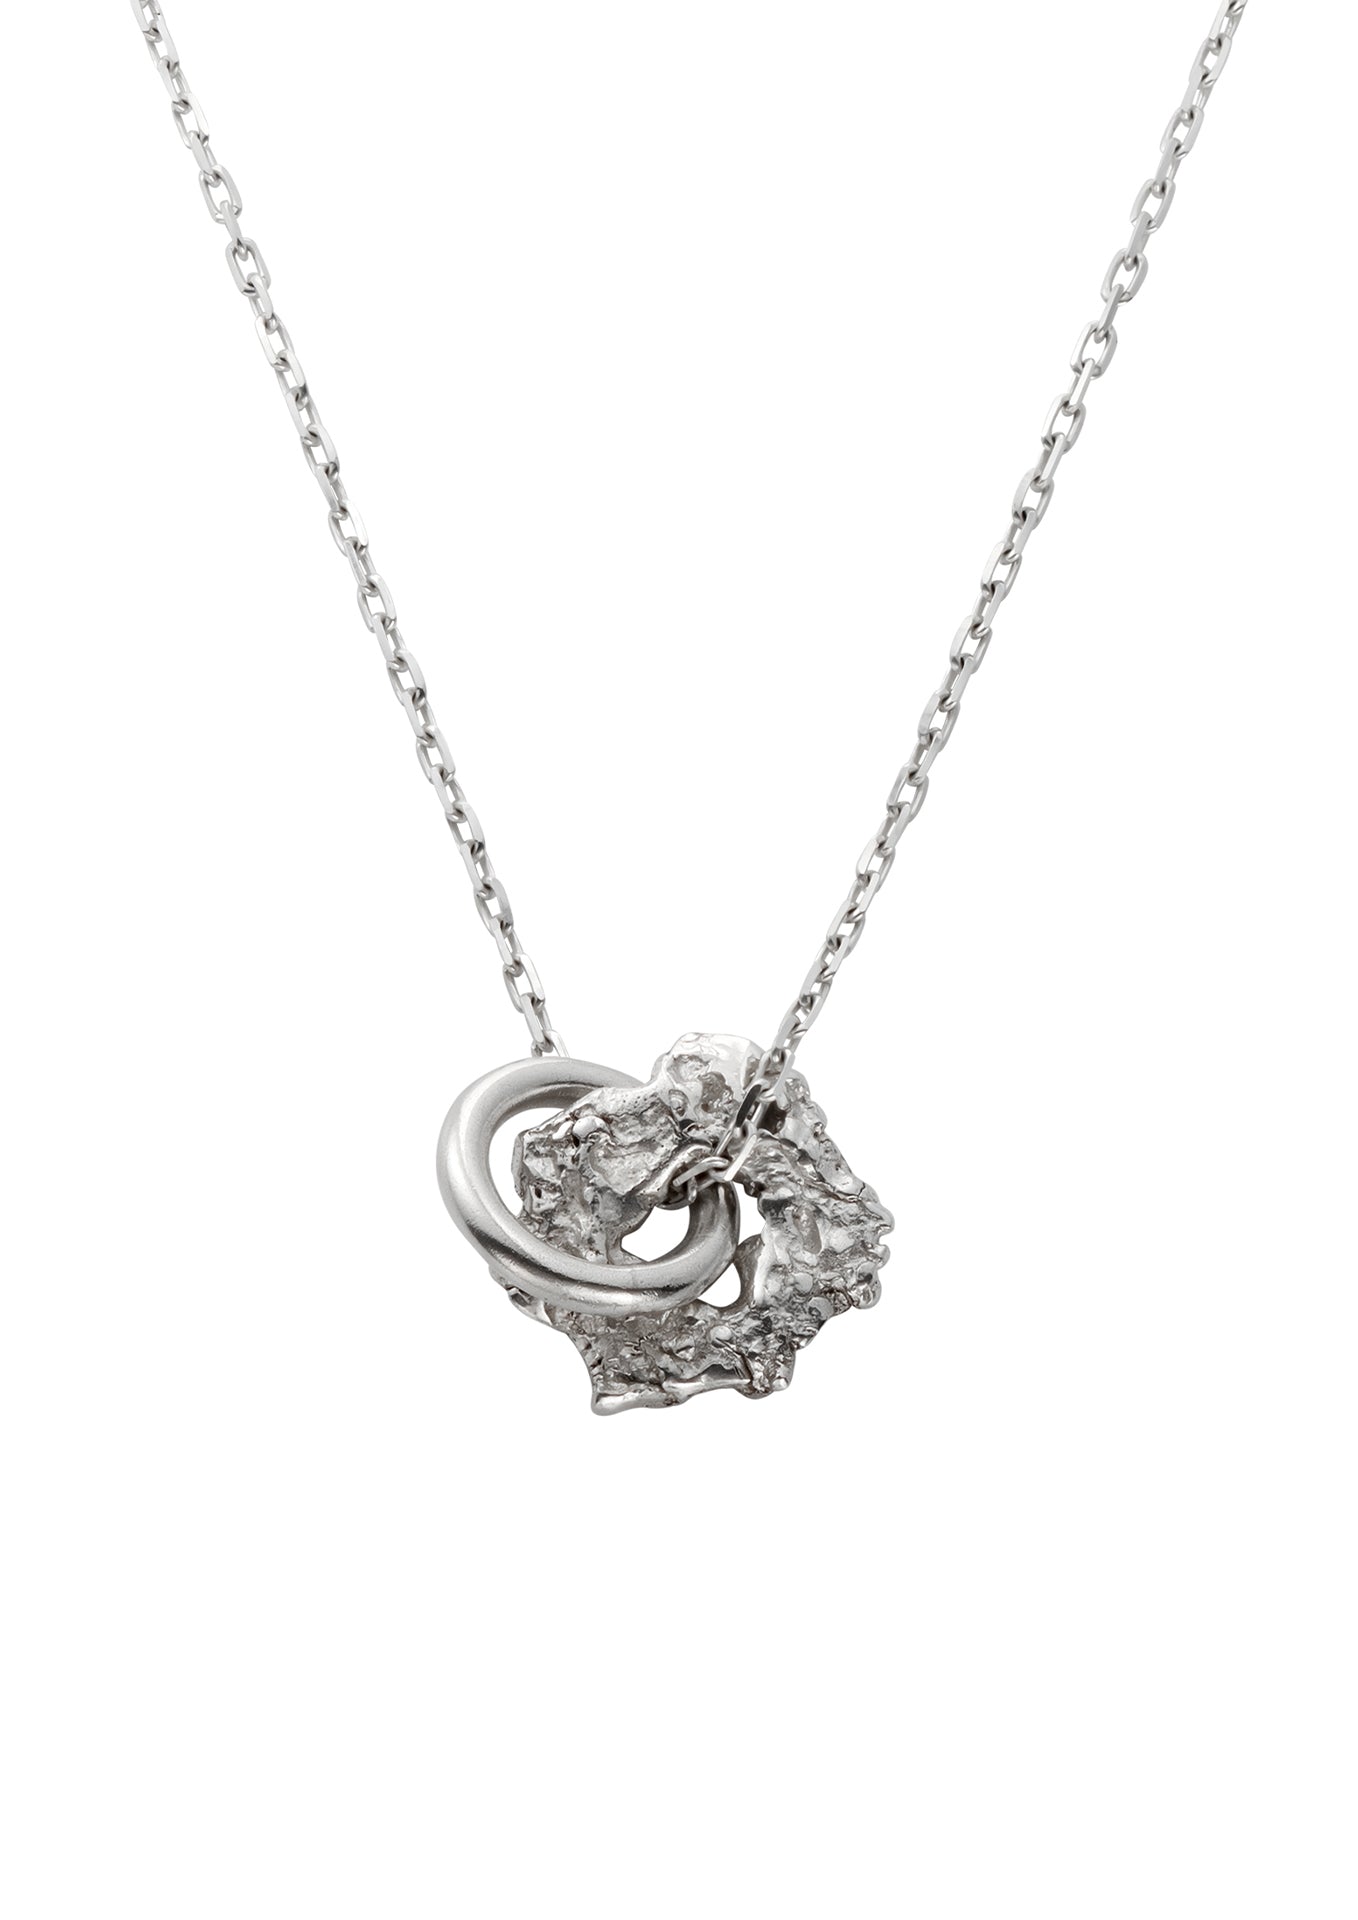 Forever Raw Necklace Silver - NO MORE ACCESSORIES